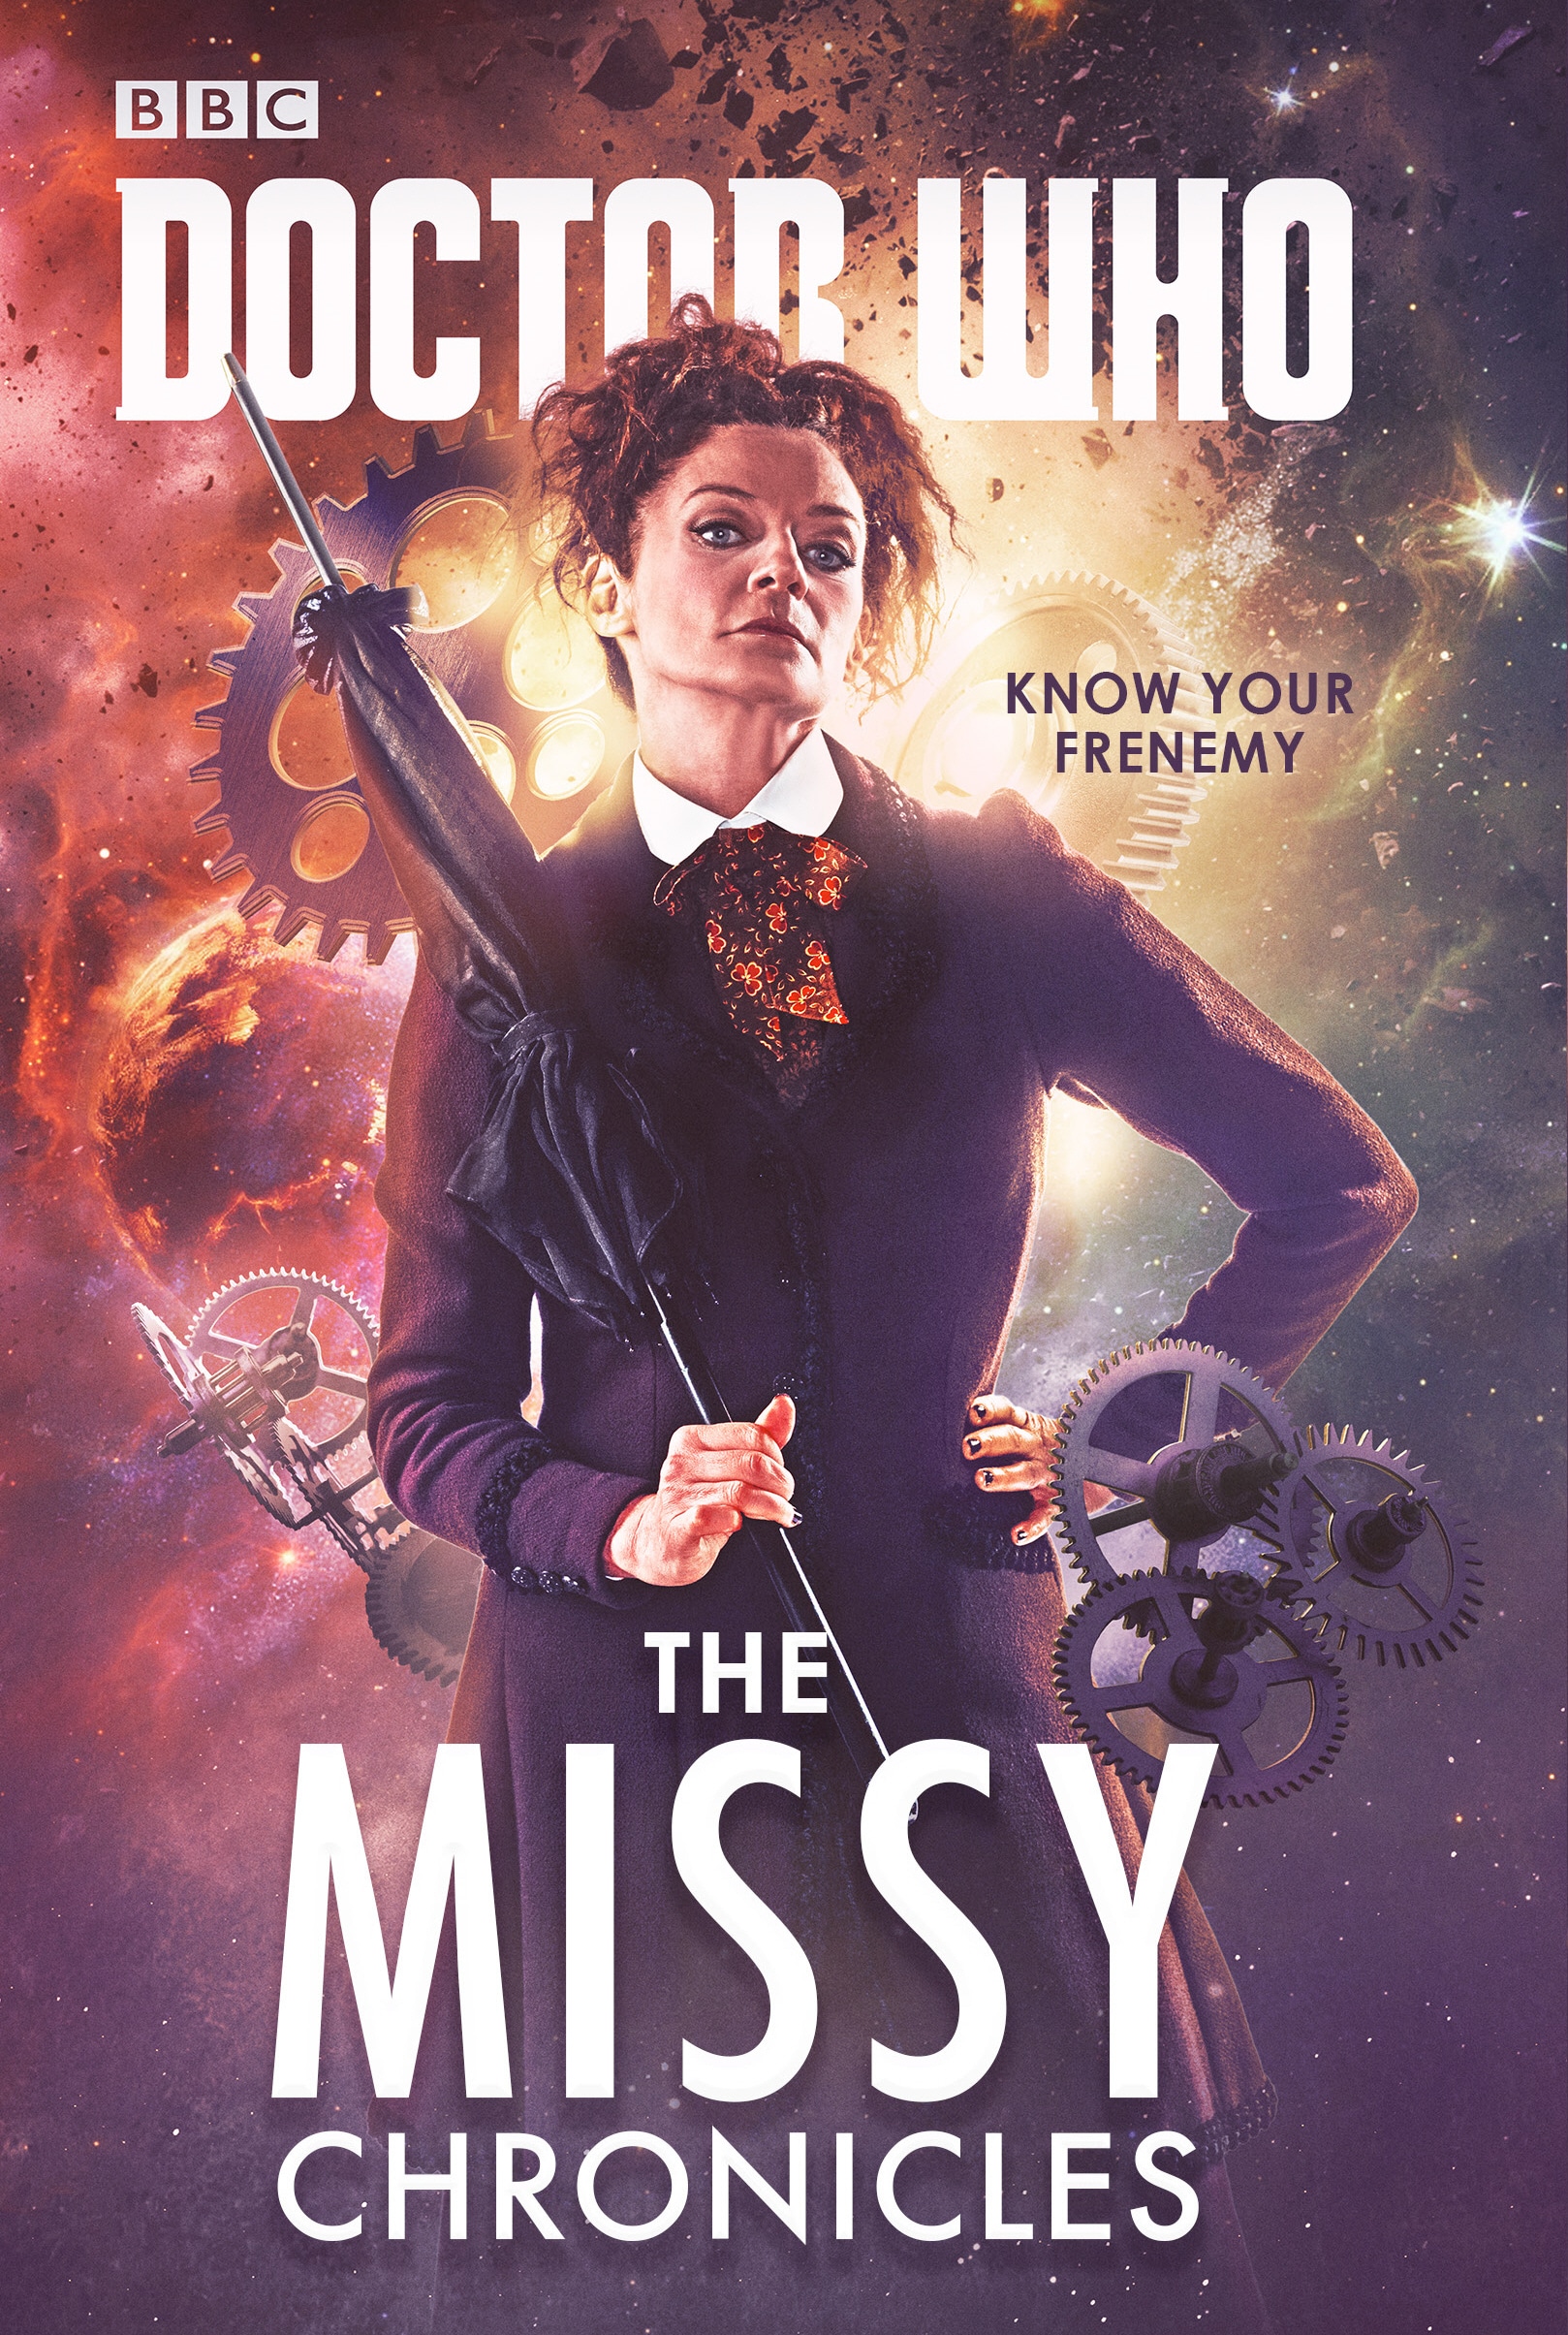 Book “Doctor Who: The Missy Chronicles” by Cavan Scott — January 17, 2019